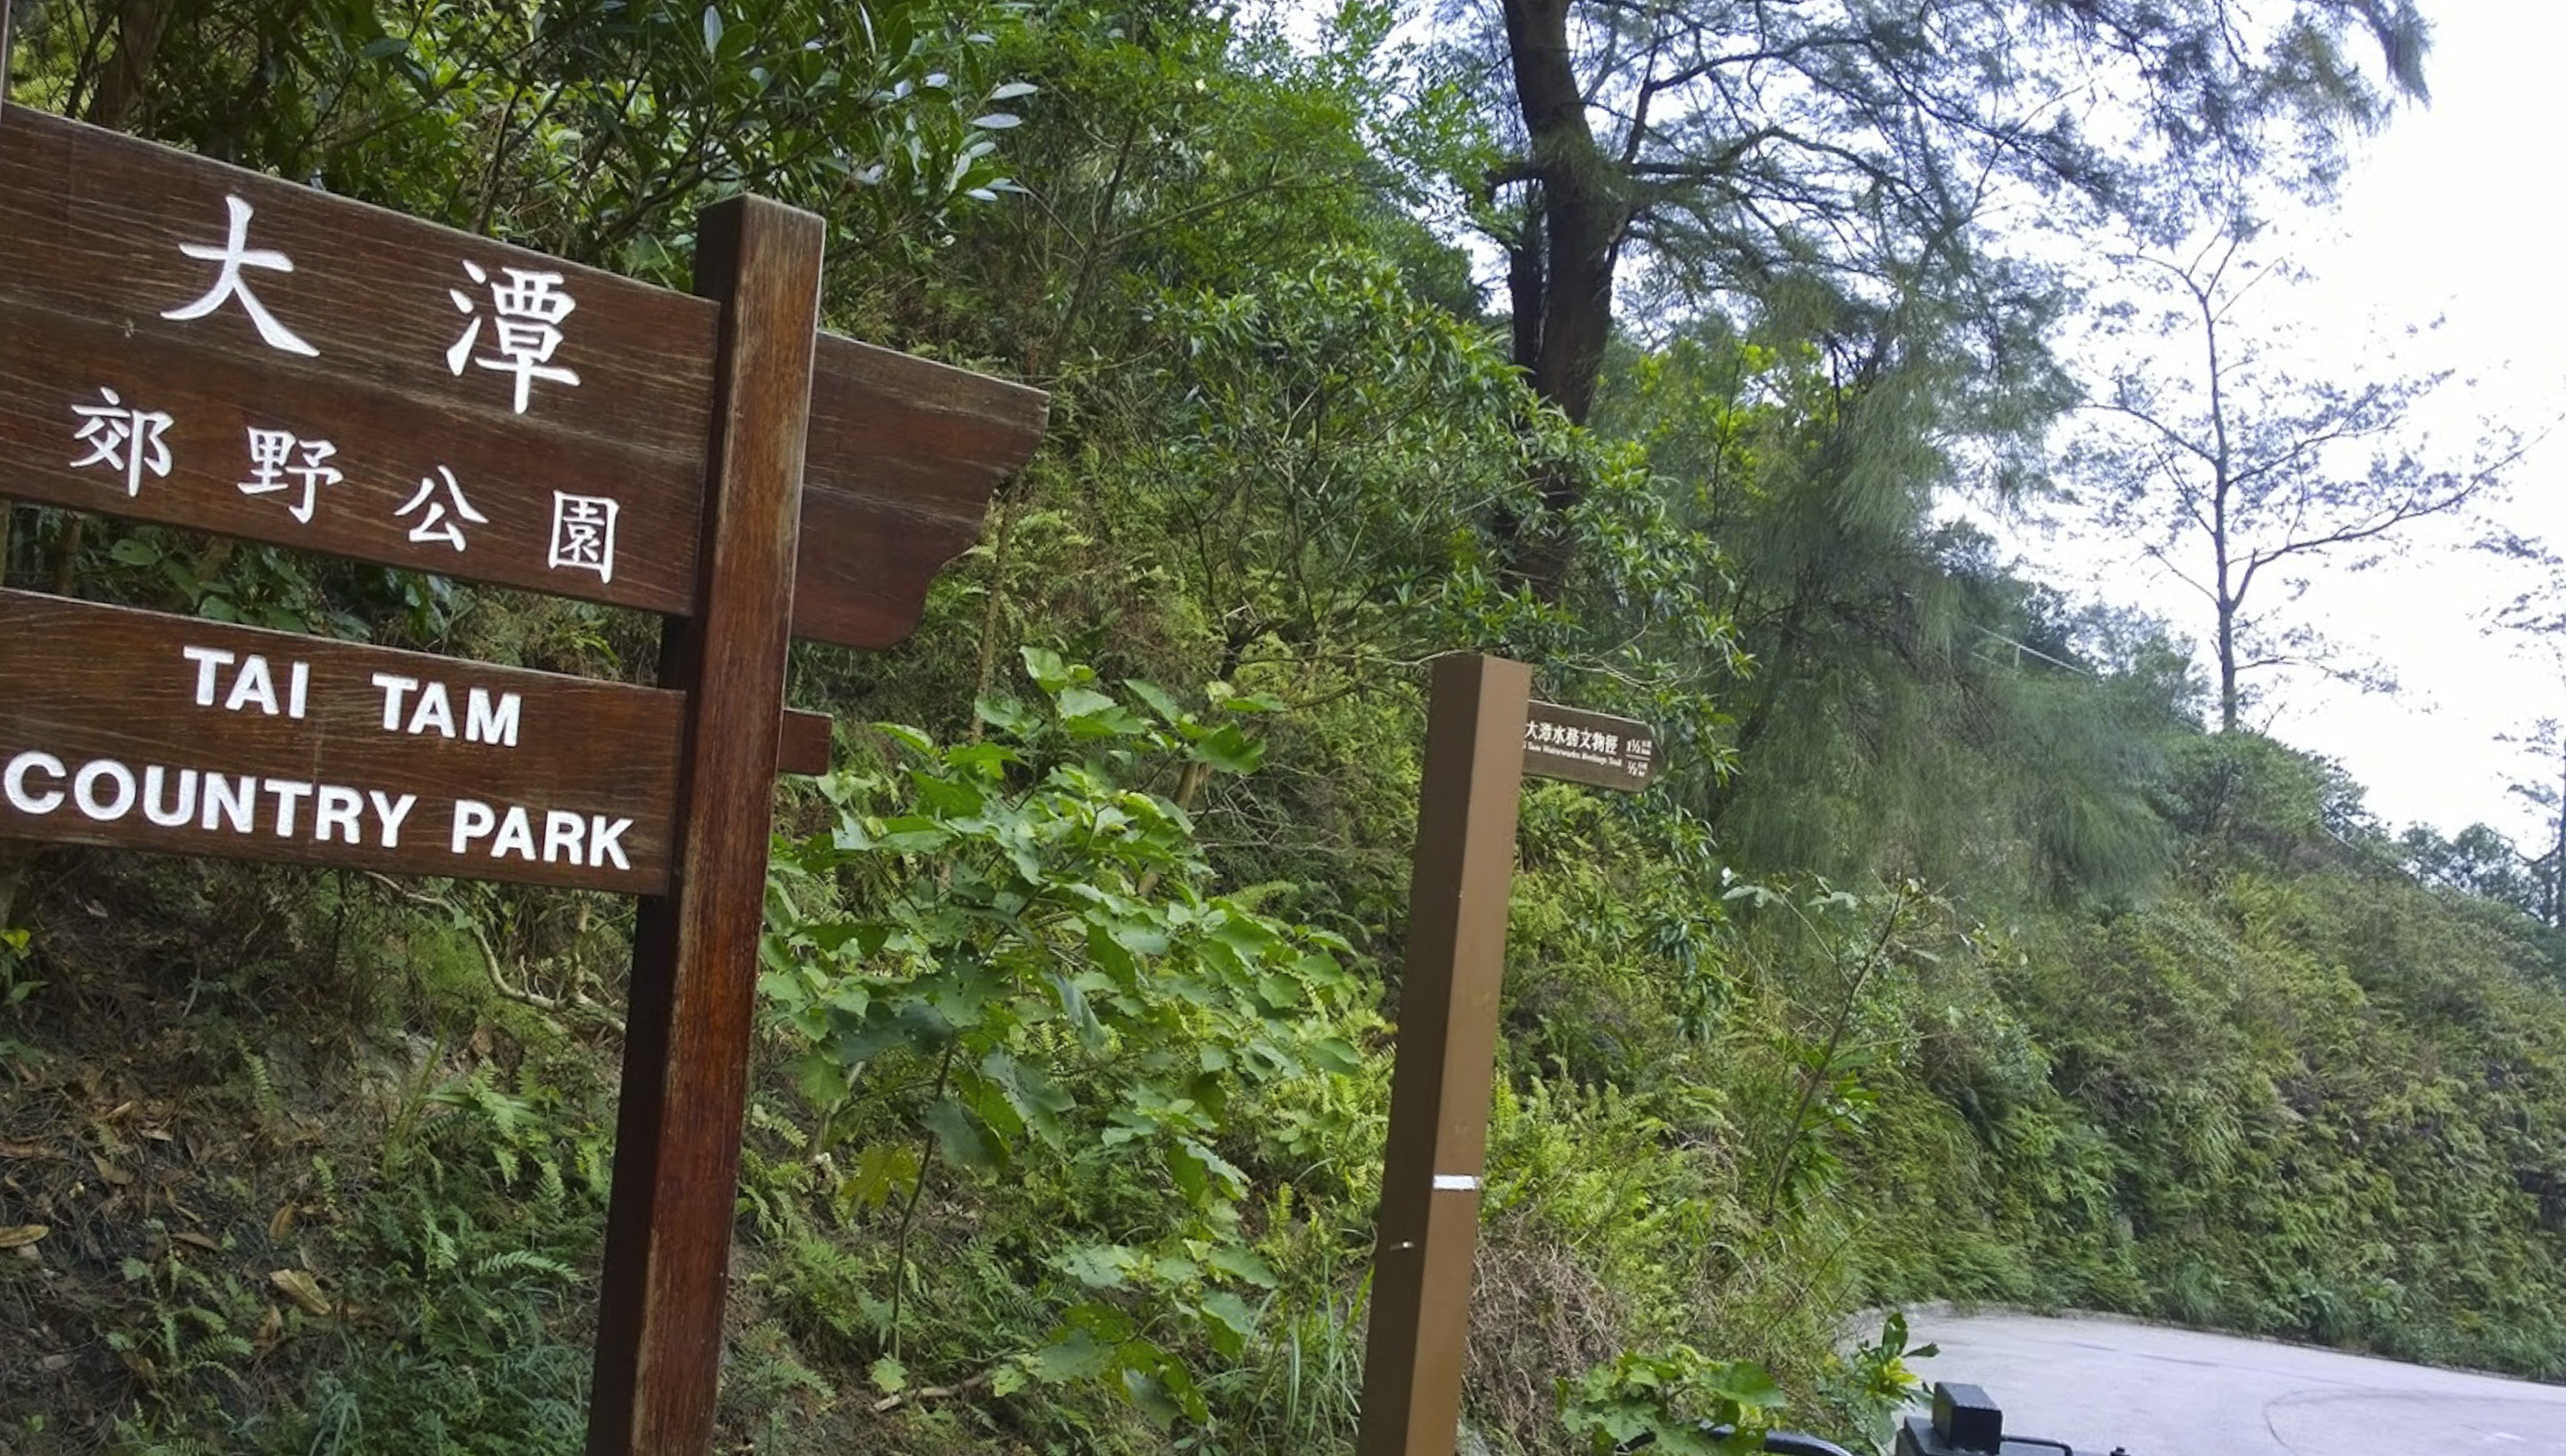 Tai Tam Country Park, where the artillery shell was discovered. Photo: Handout